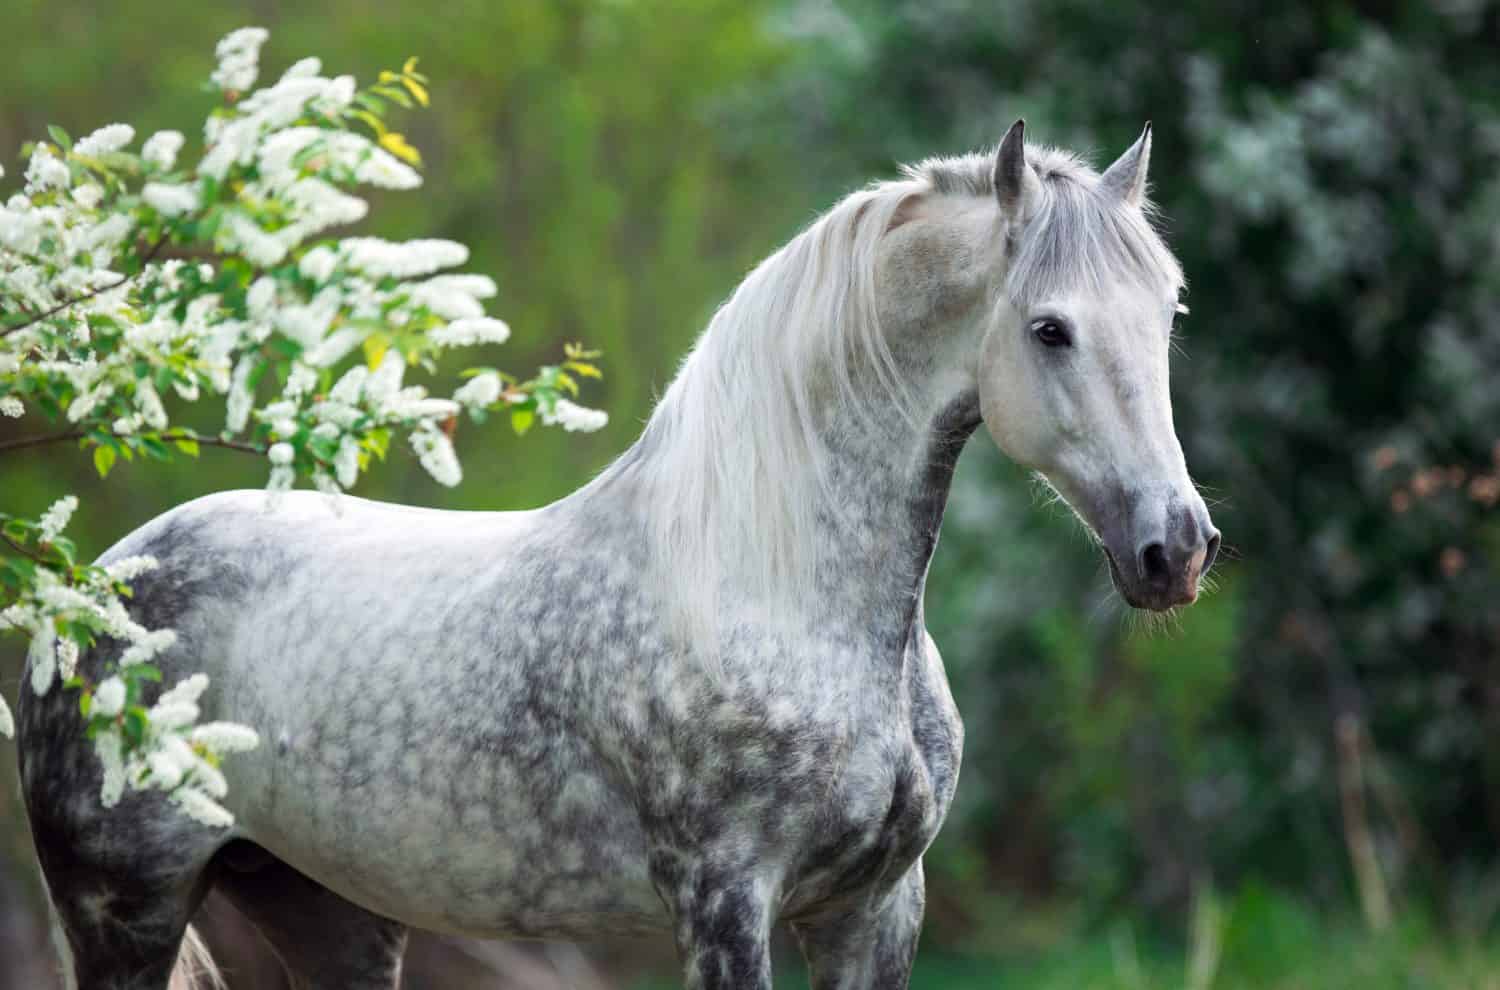 portrait of a white gray horse in summer in green leaves with white flowers